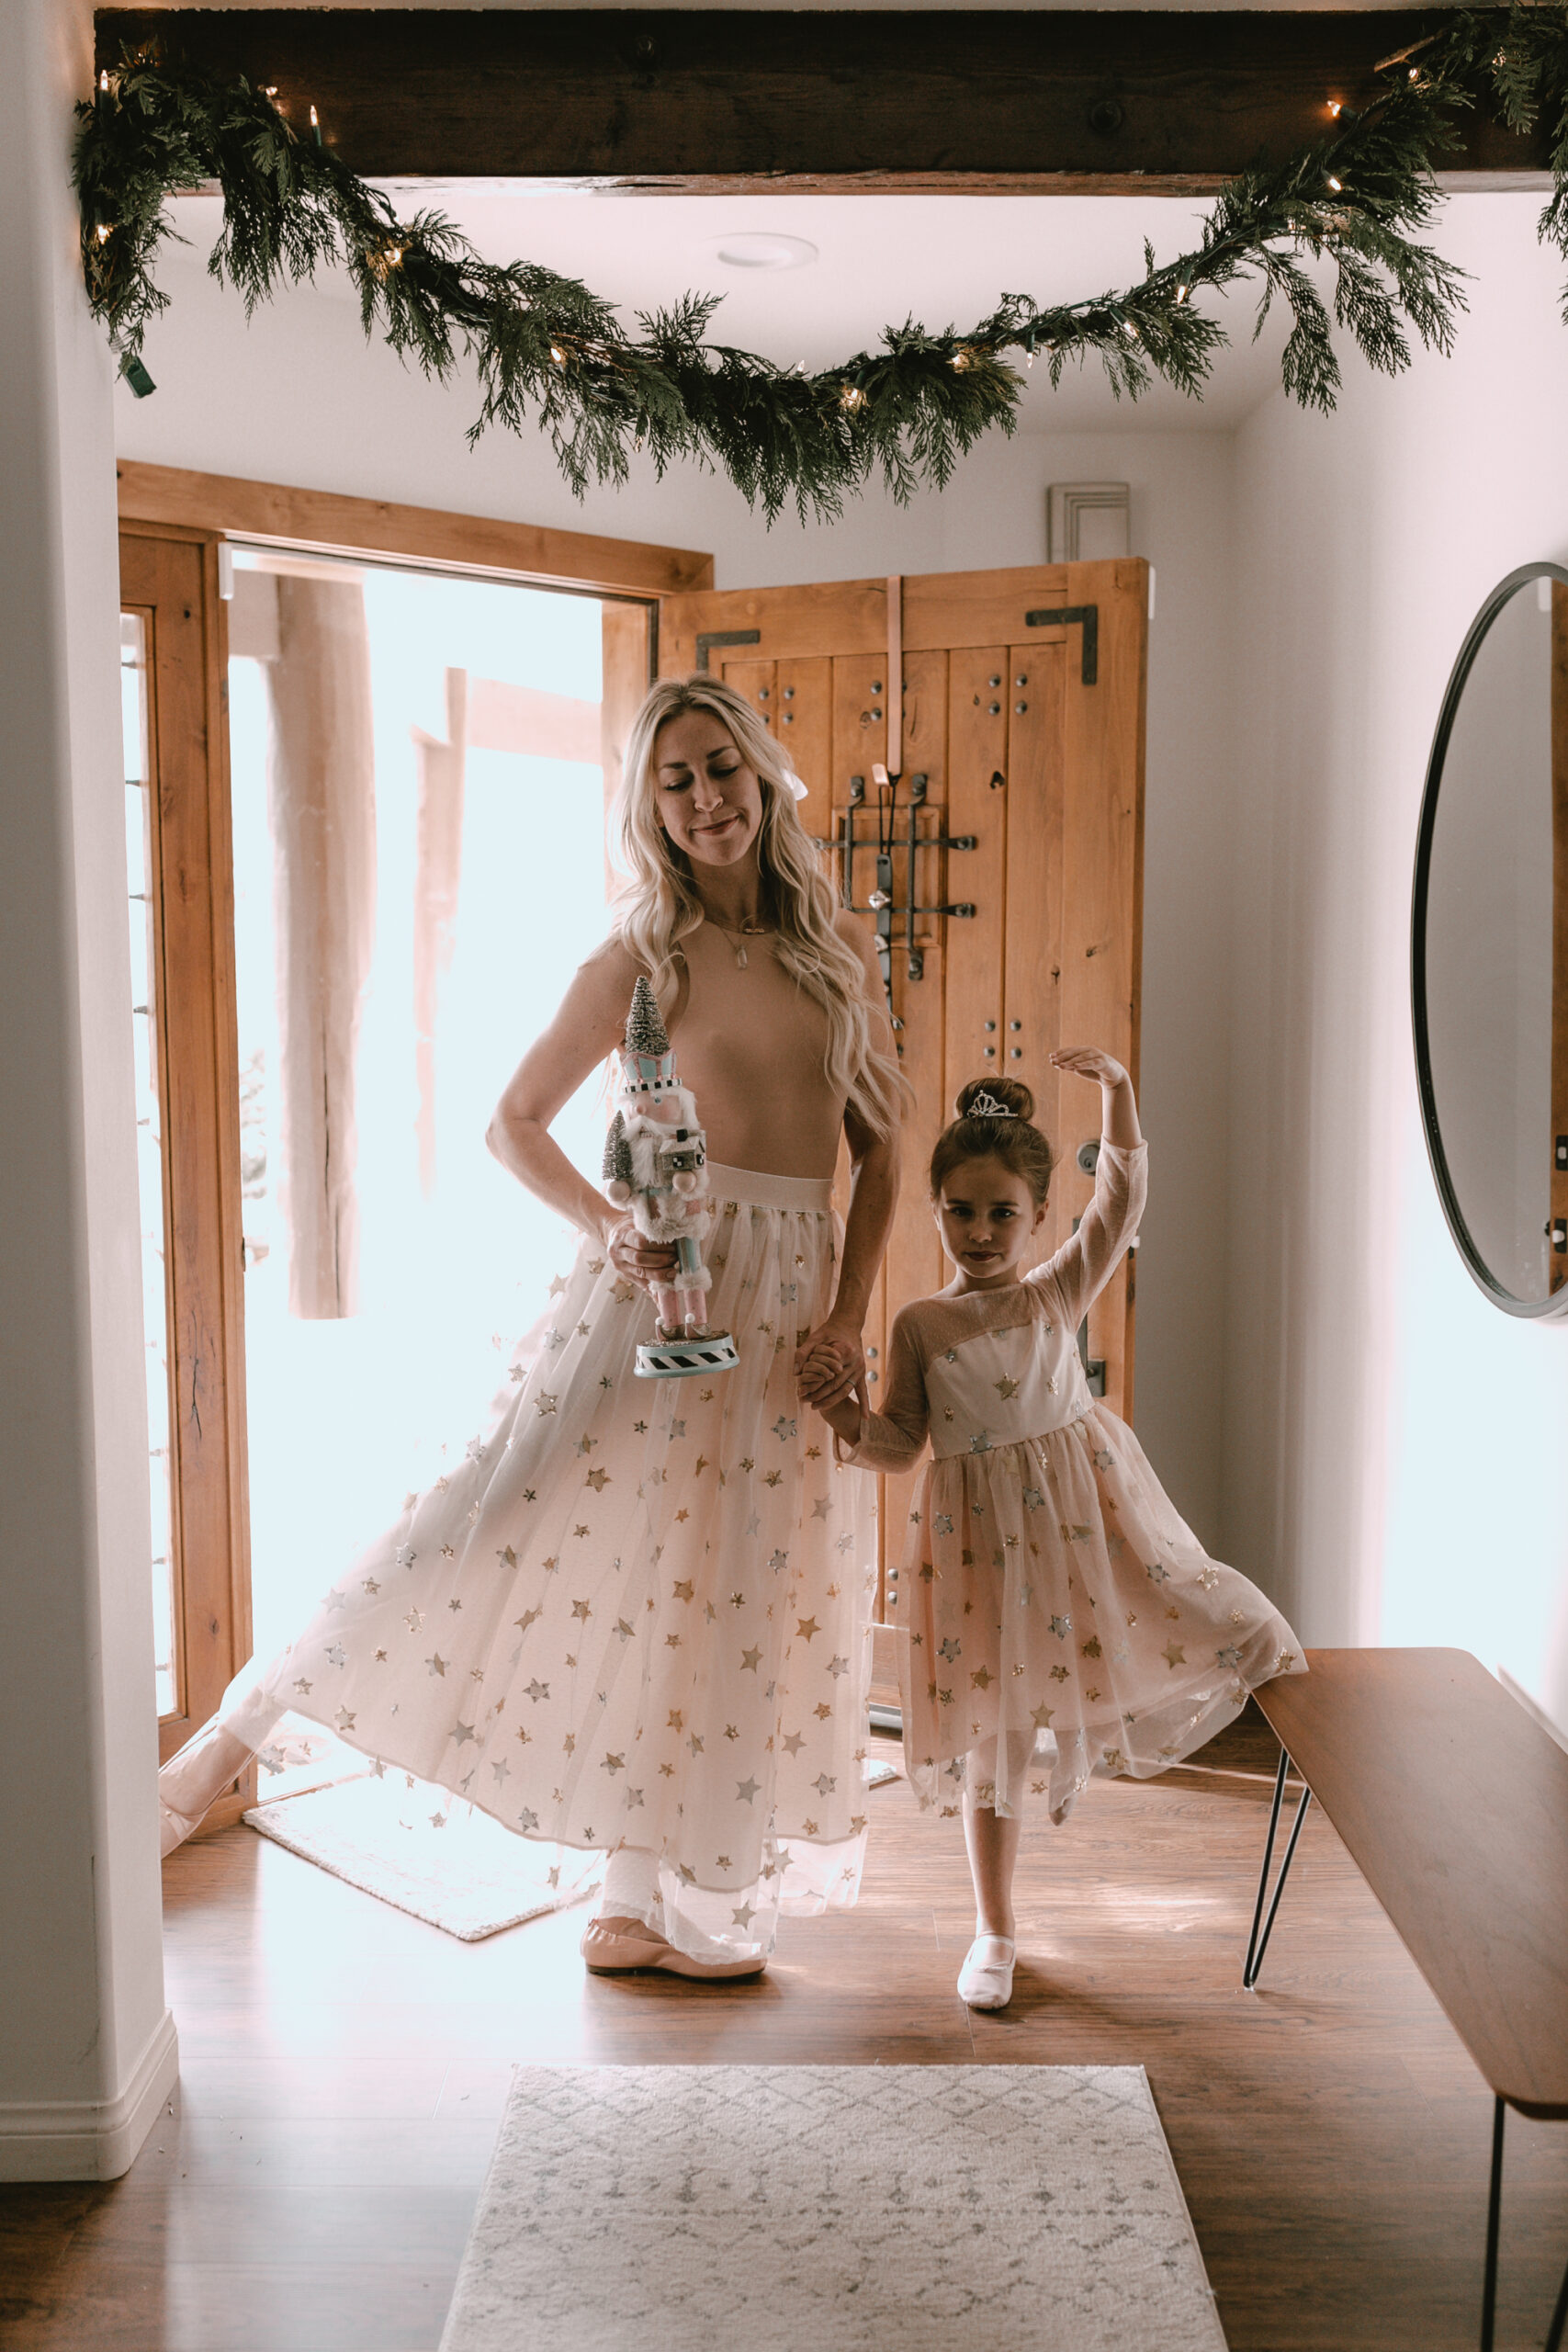 sharing our favorite family friendly festive fun in phoenix, including going to the nutcracker ballet! #thelovedesignedlife #phx #thingstodoinphoenix #holidayfun